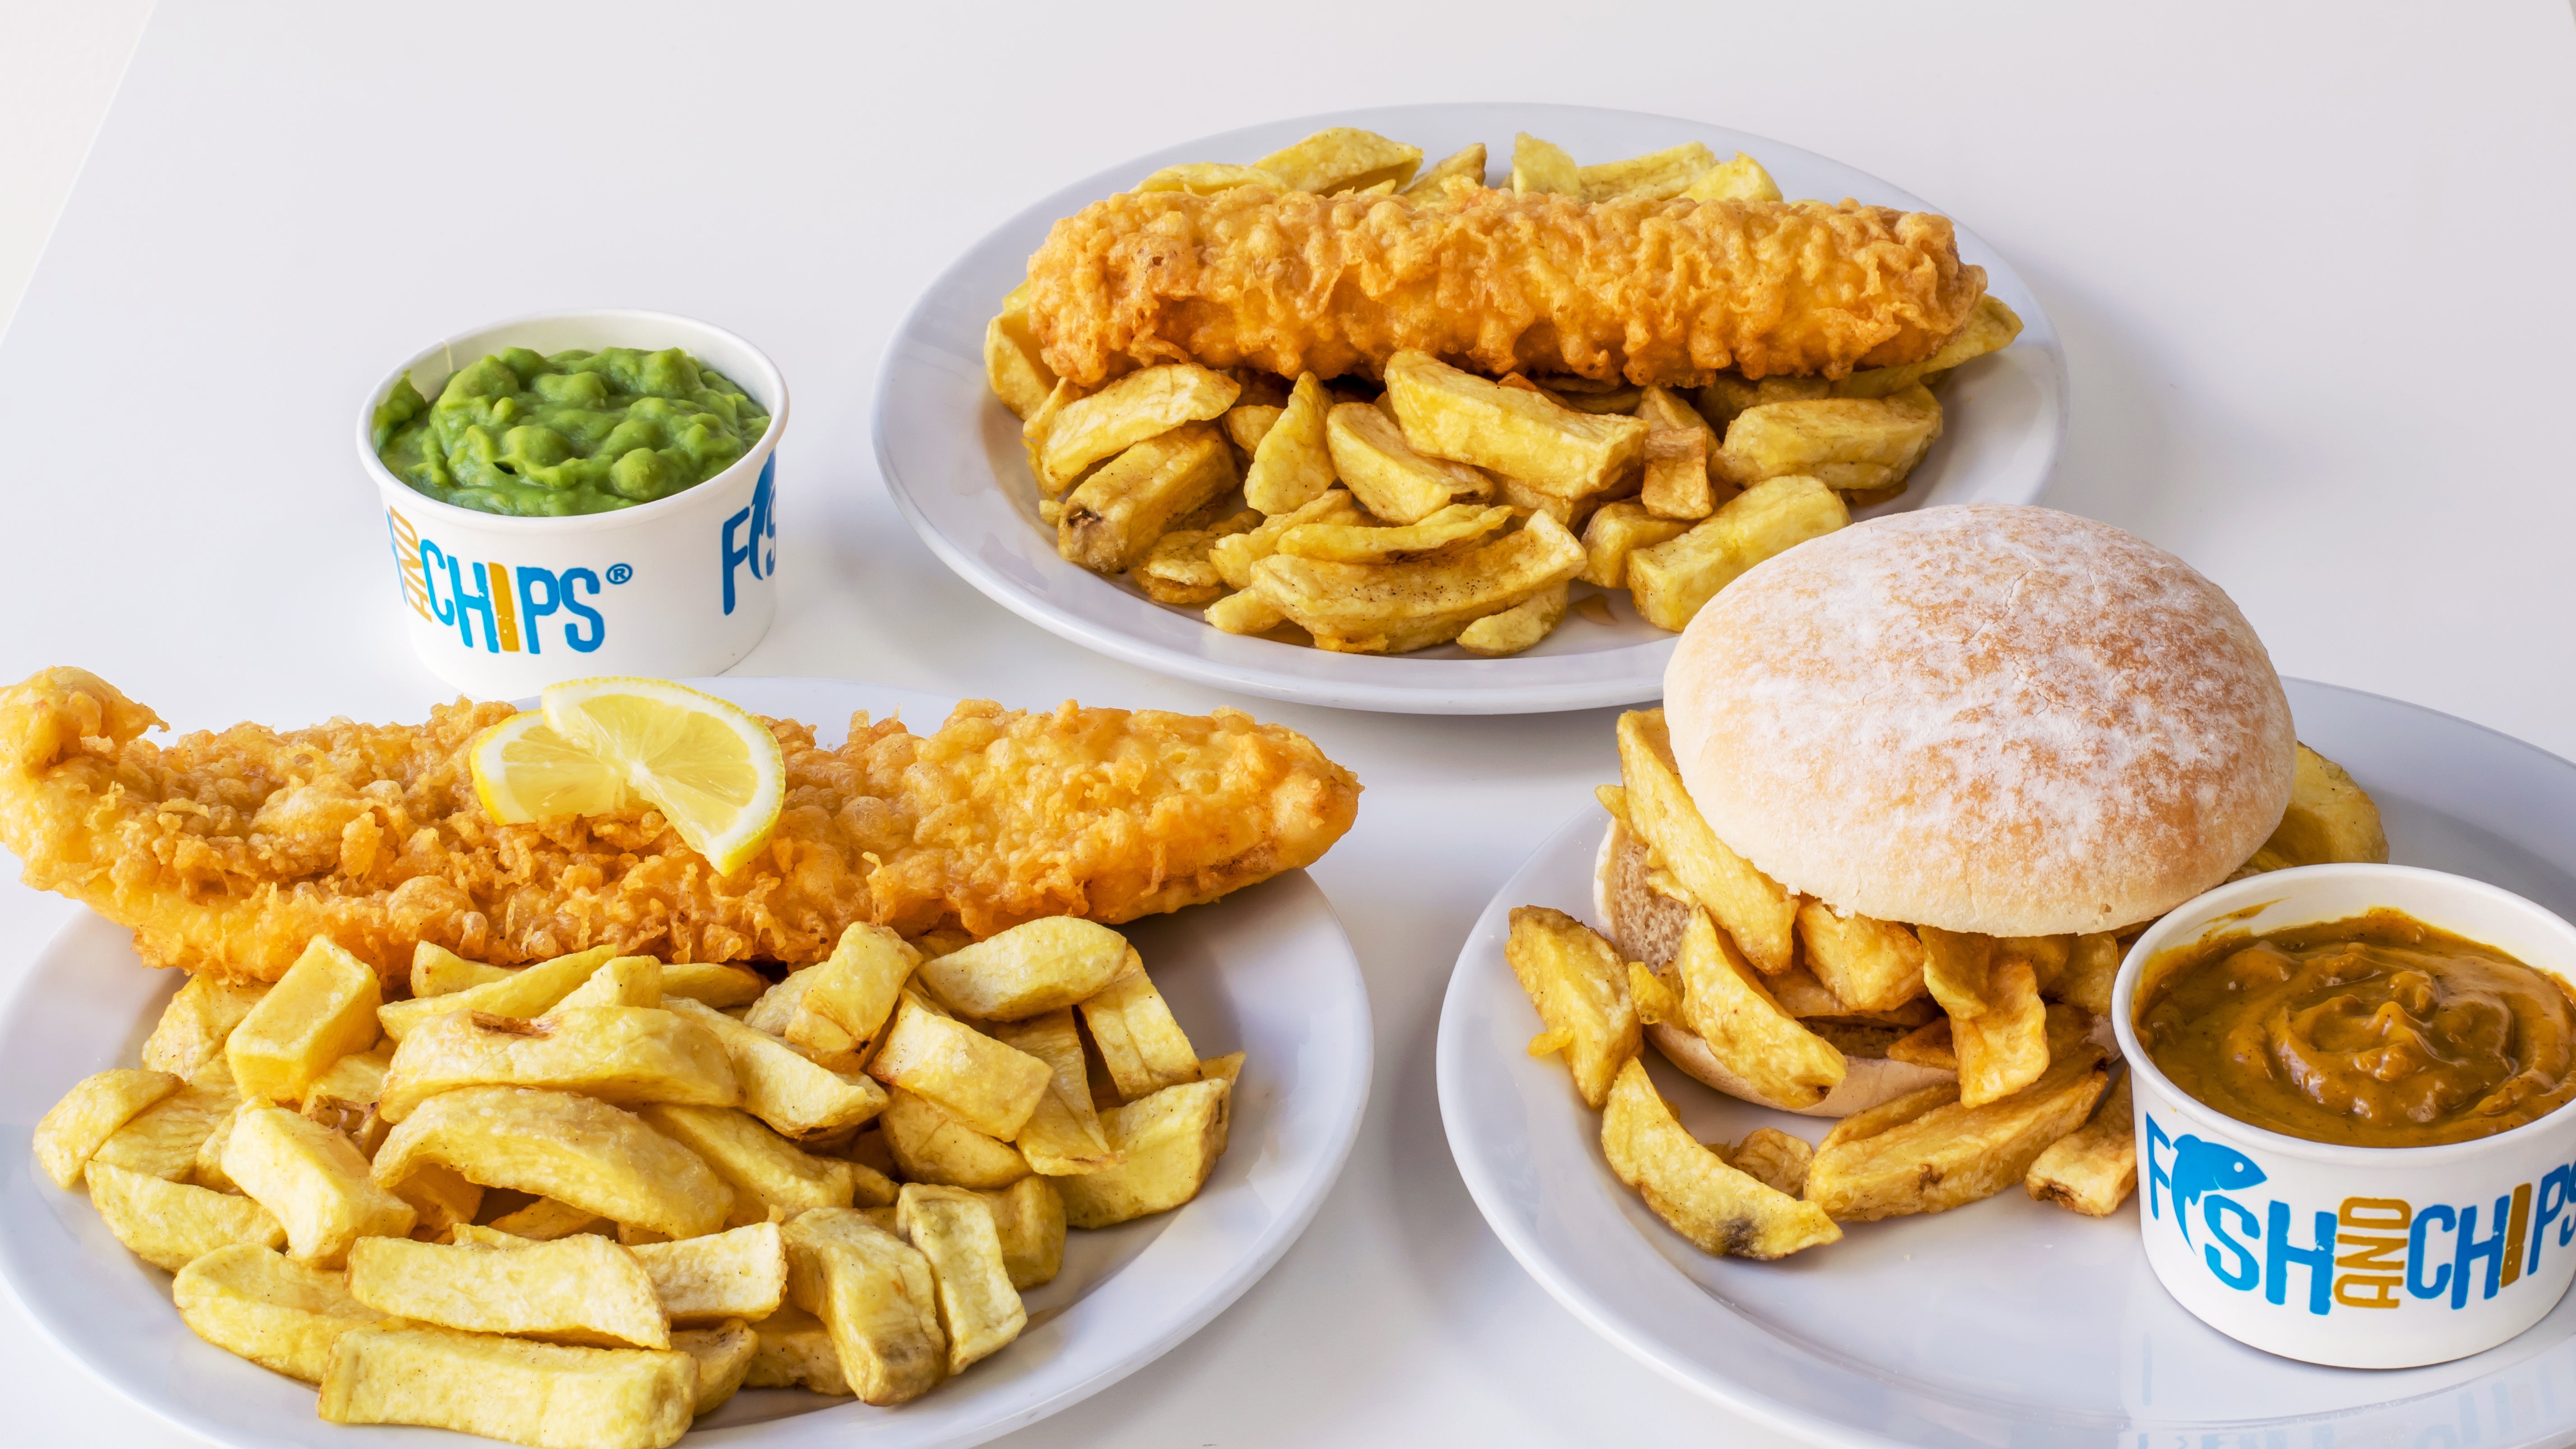 Top Catch Fish & Chips